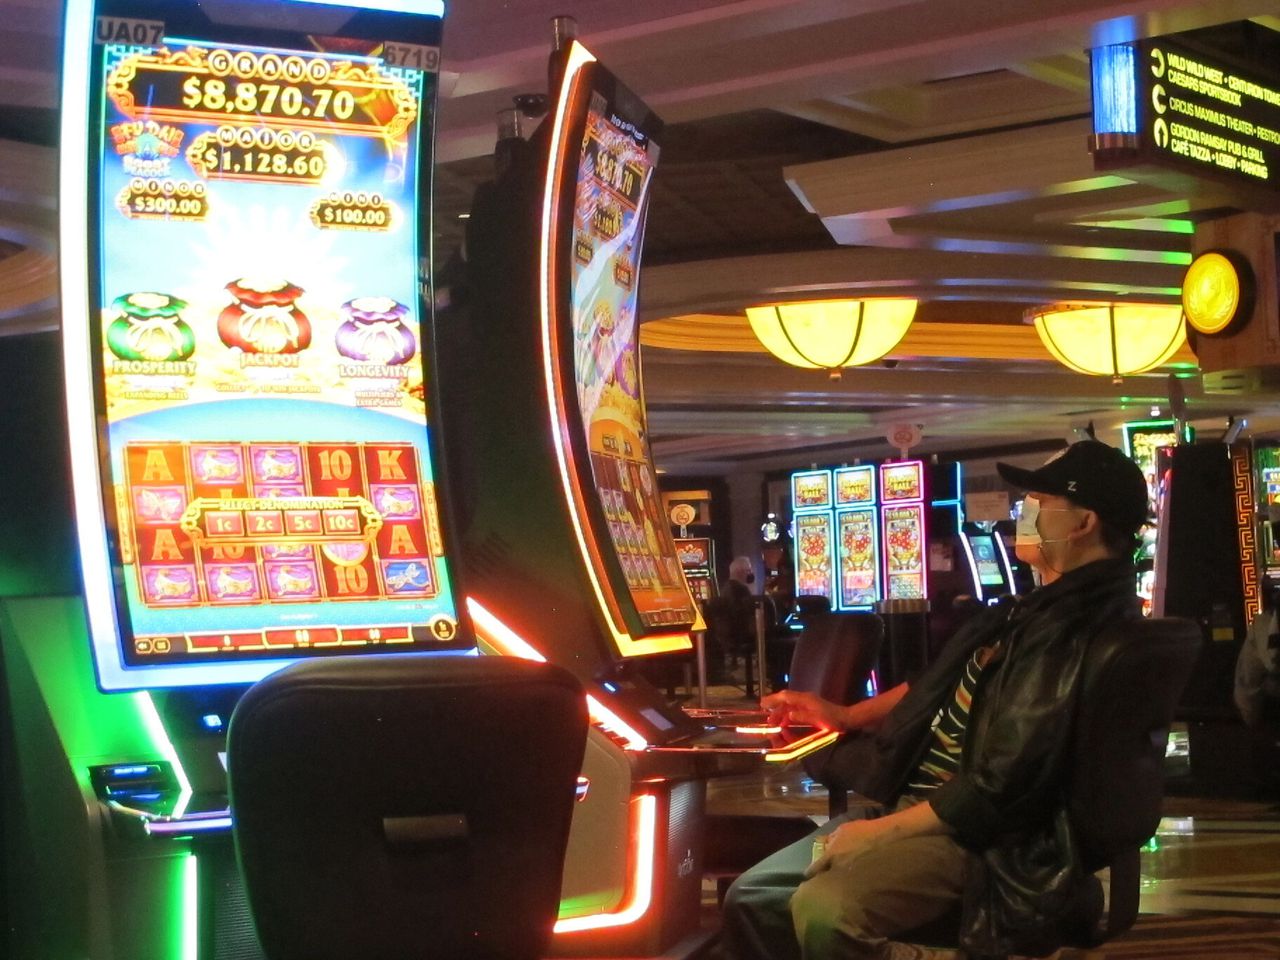 Excitement about Winning Online Slots